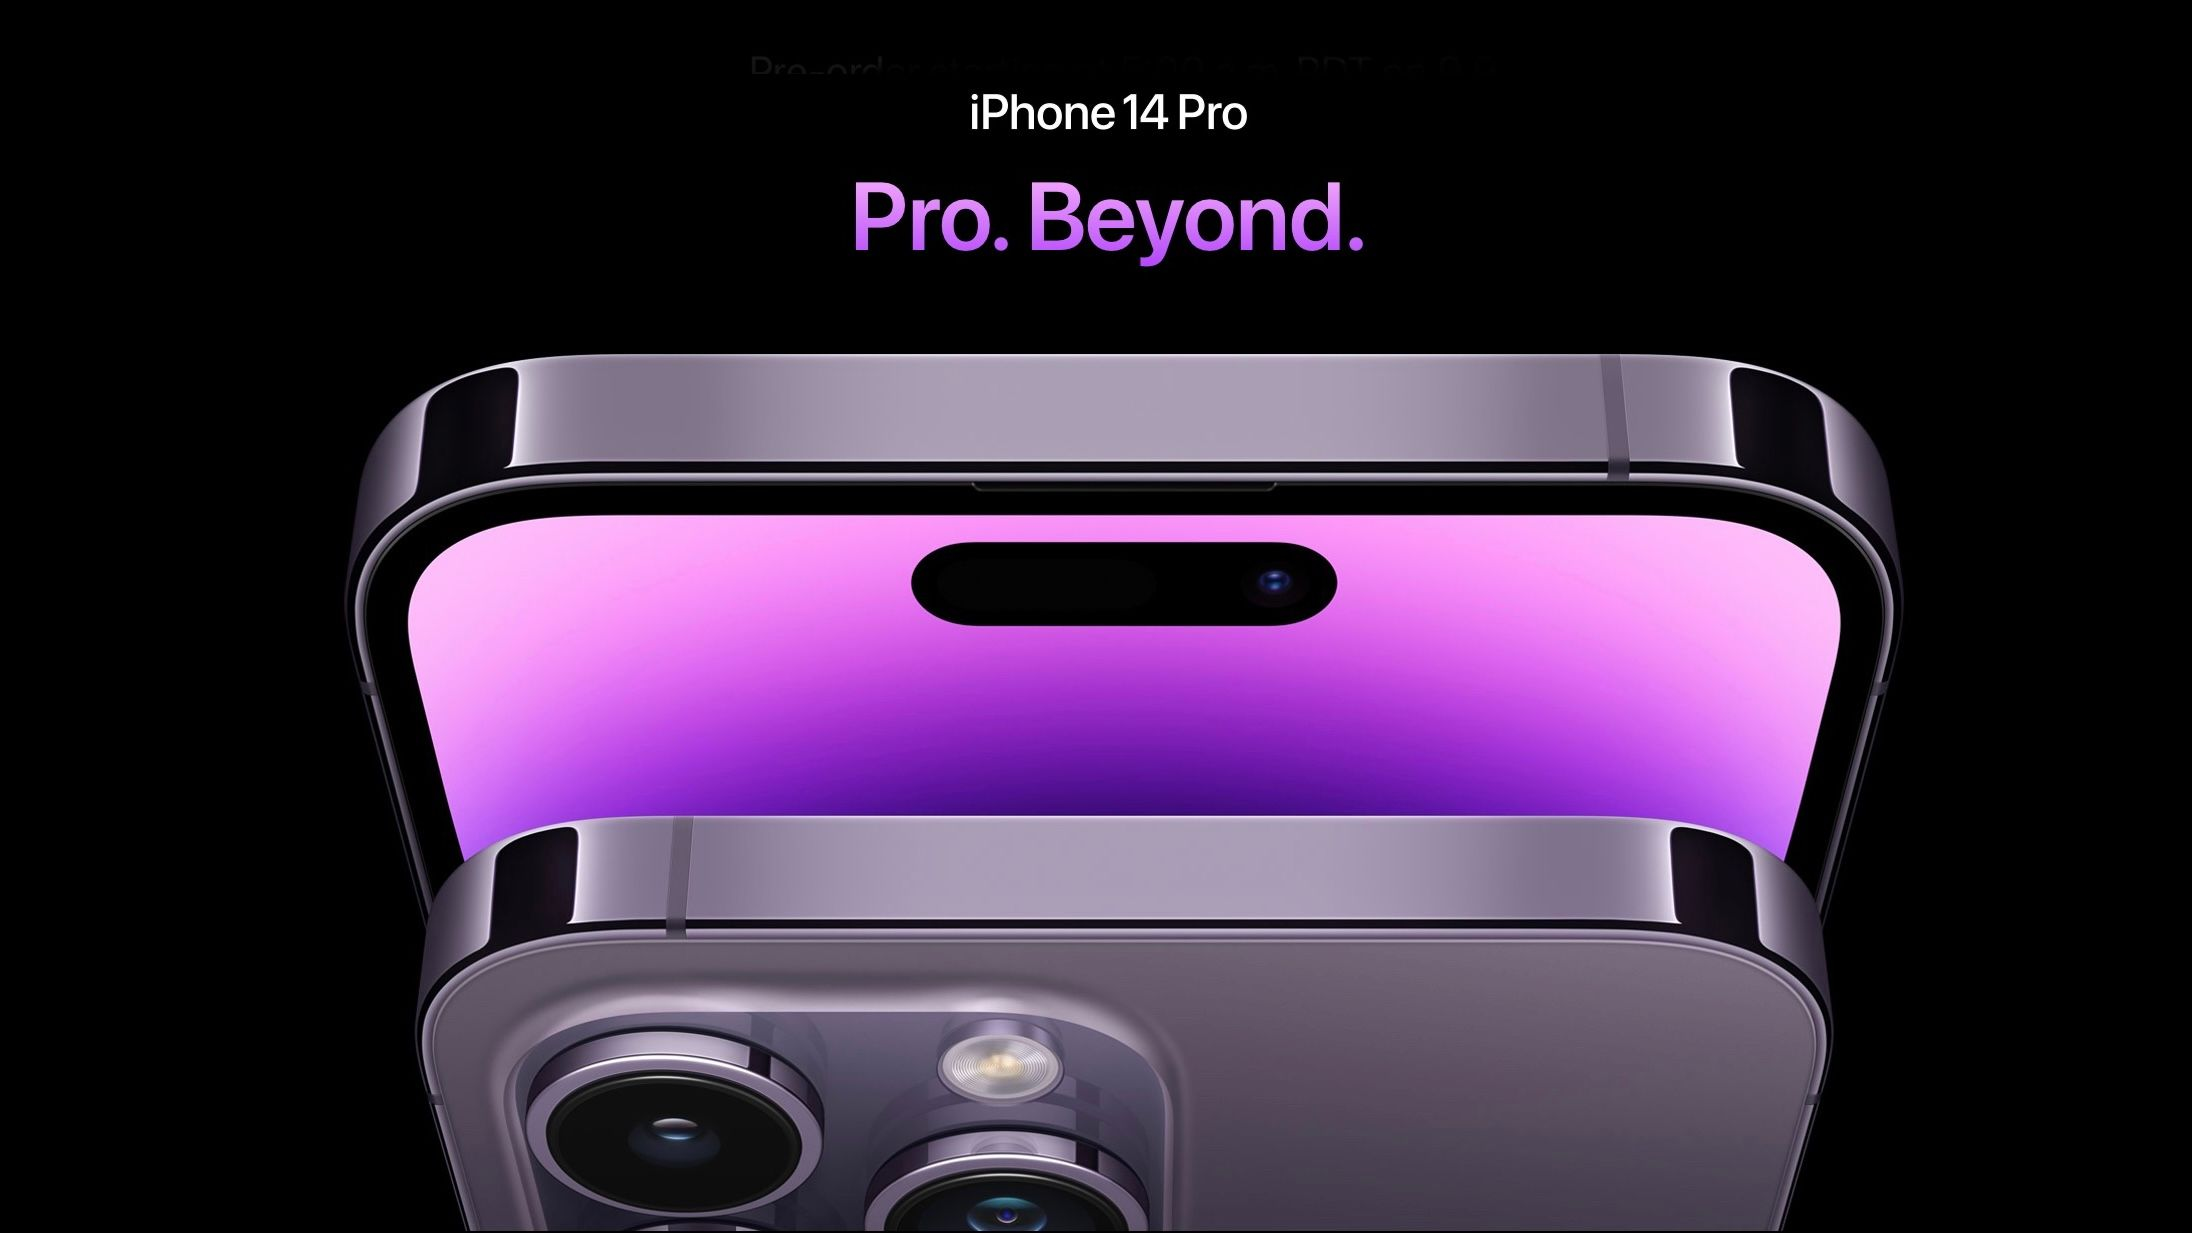 Apple iPhone 14 Pro and Pro Max: Beyond Pro